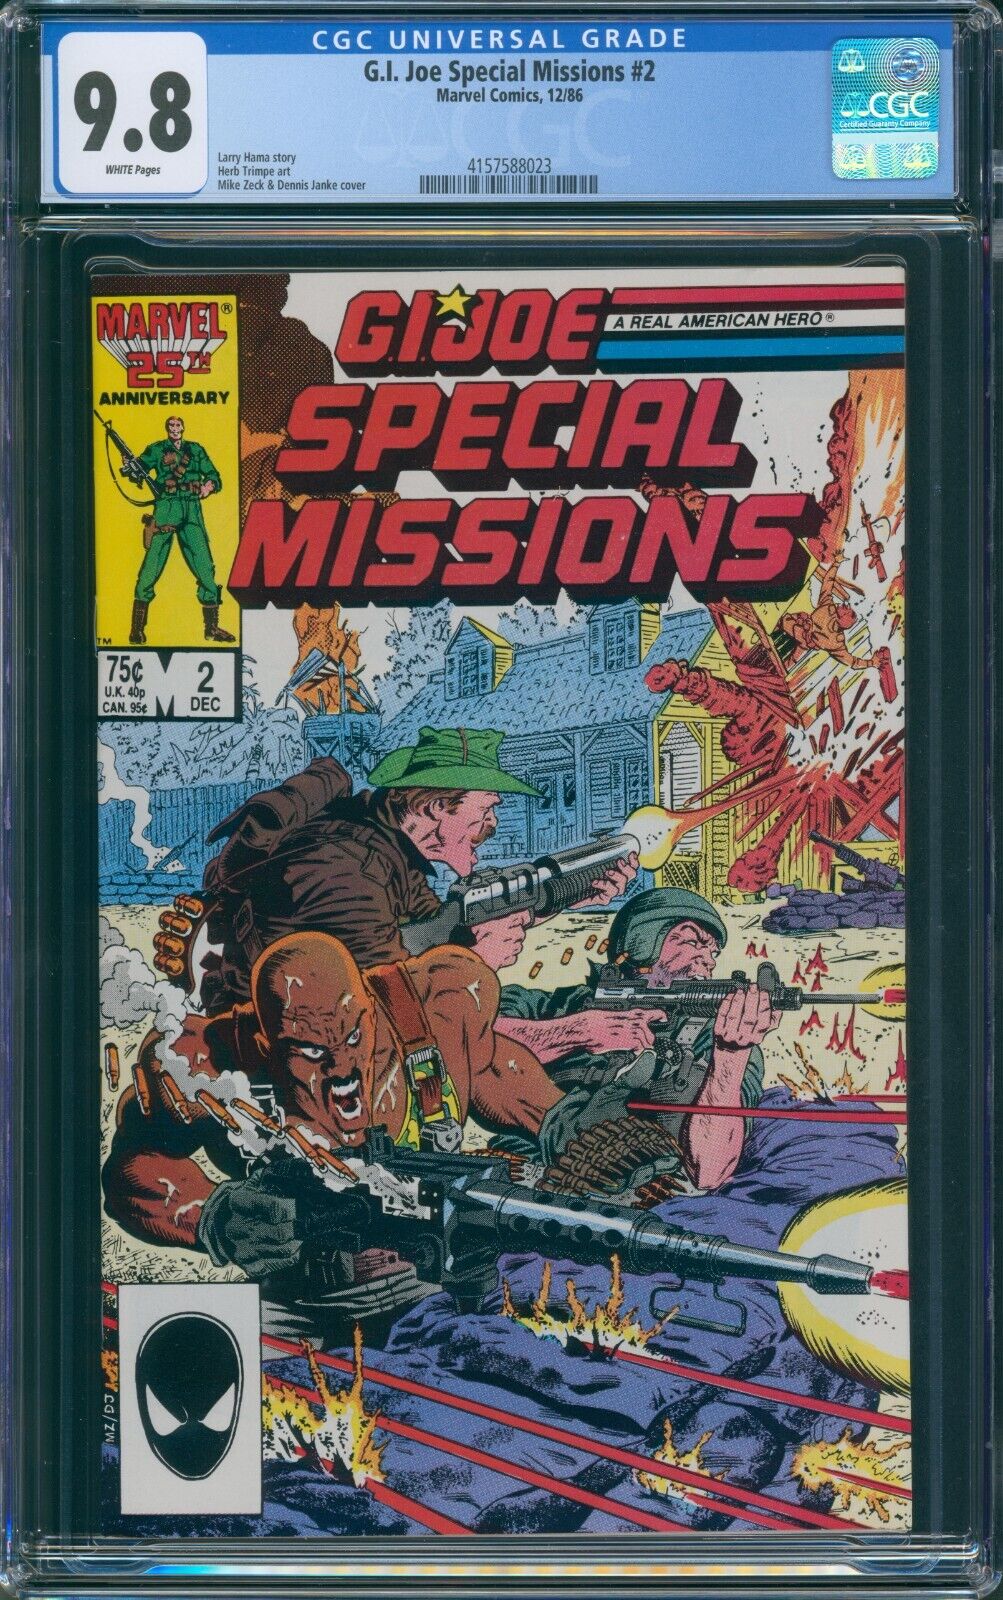 GI Joe SPECIAL MISSIONS 2 1986 CGC 98 WHITE PAGES